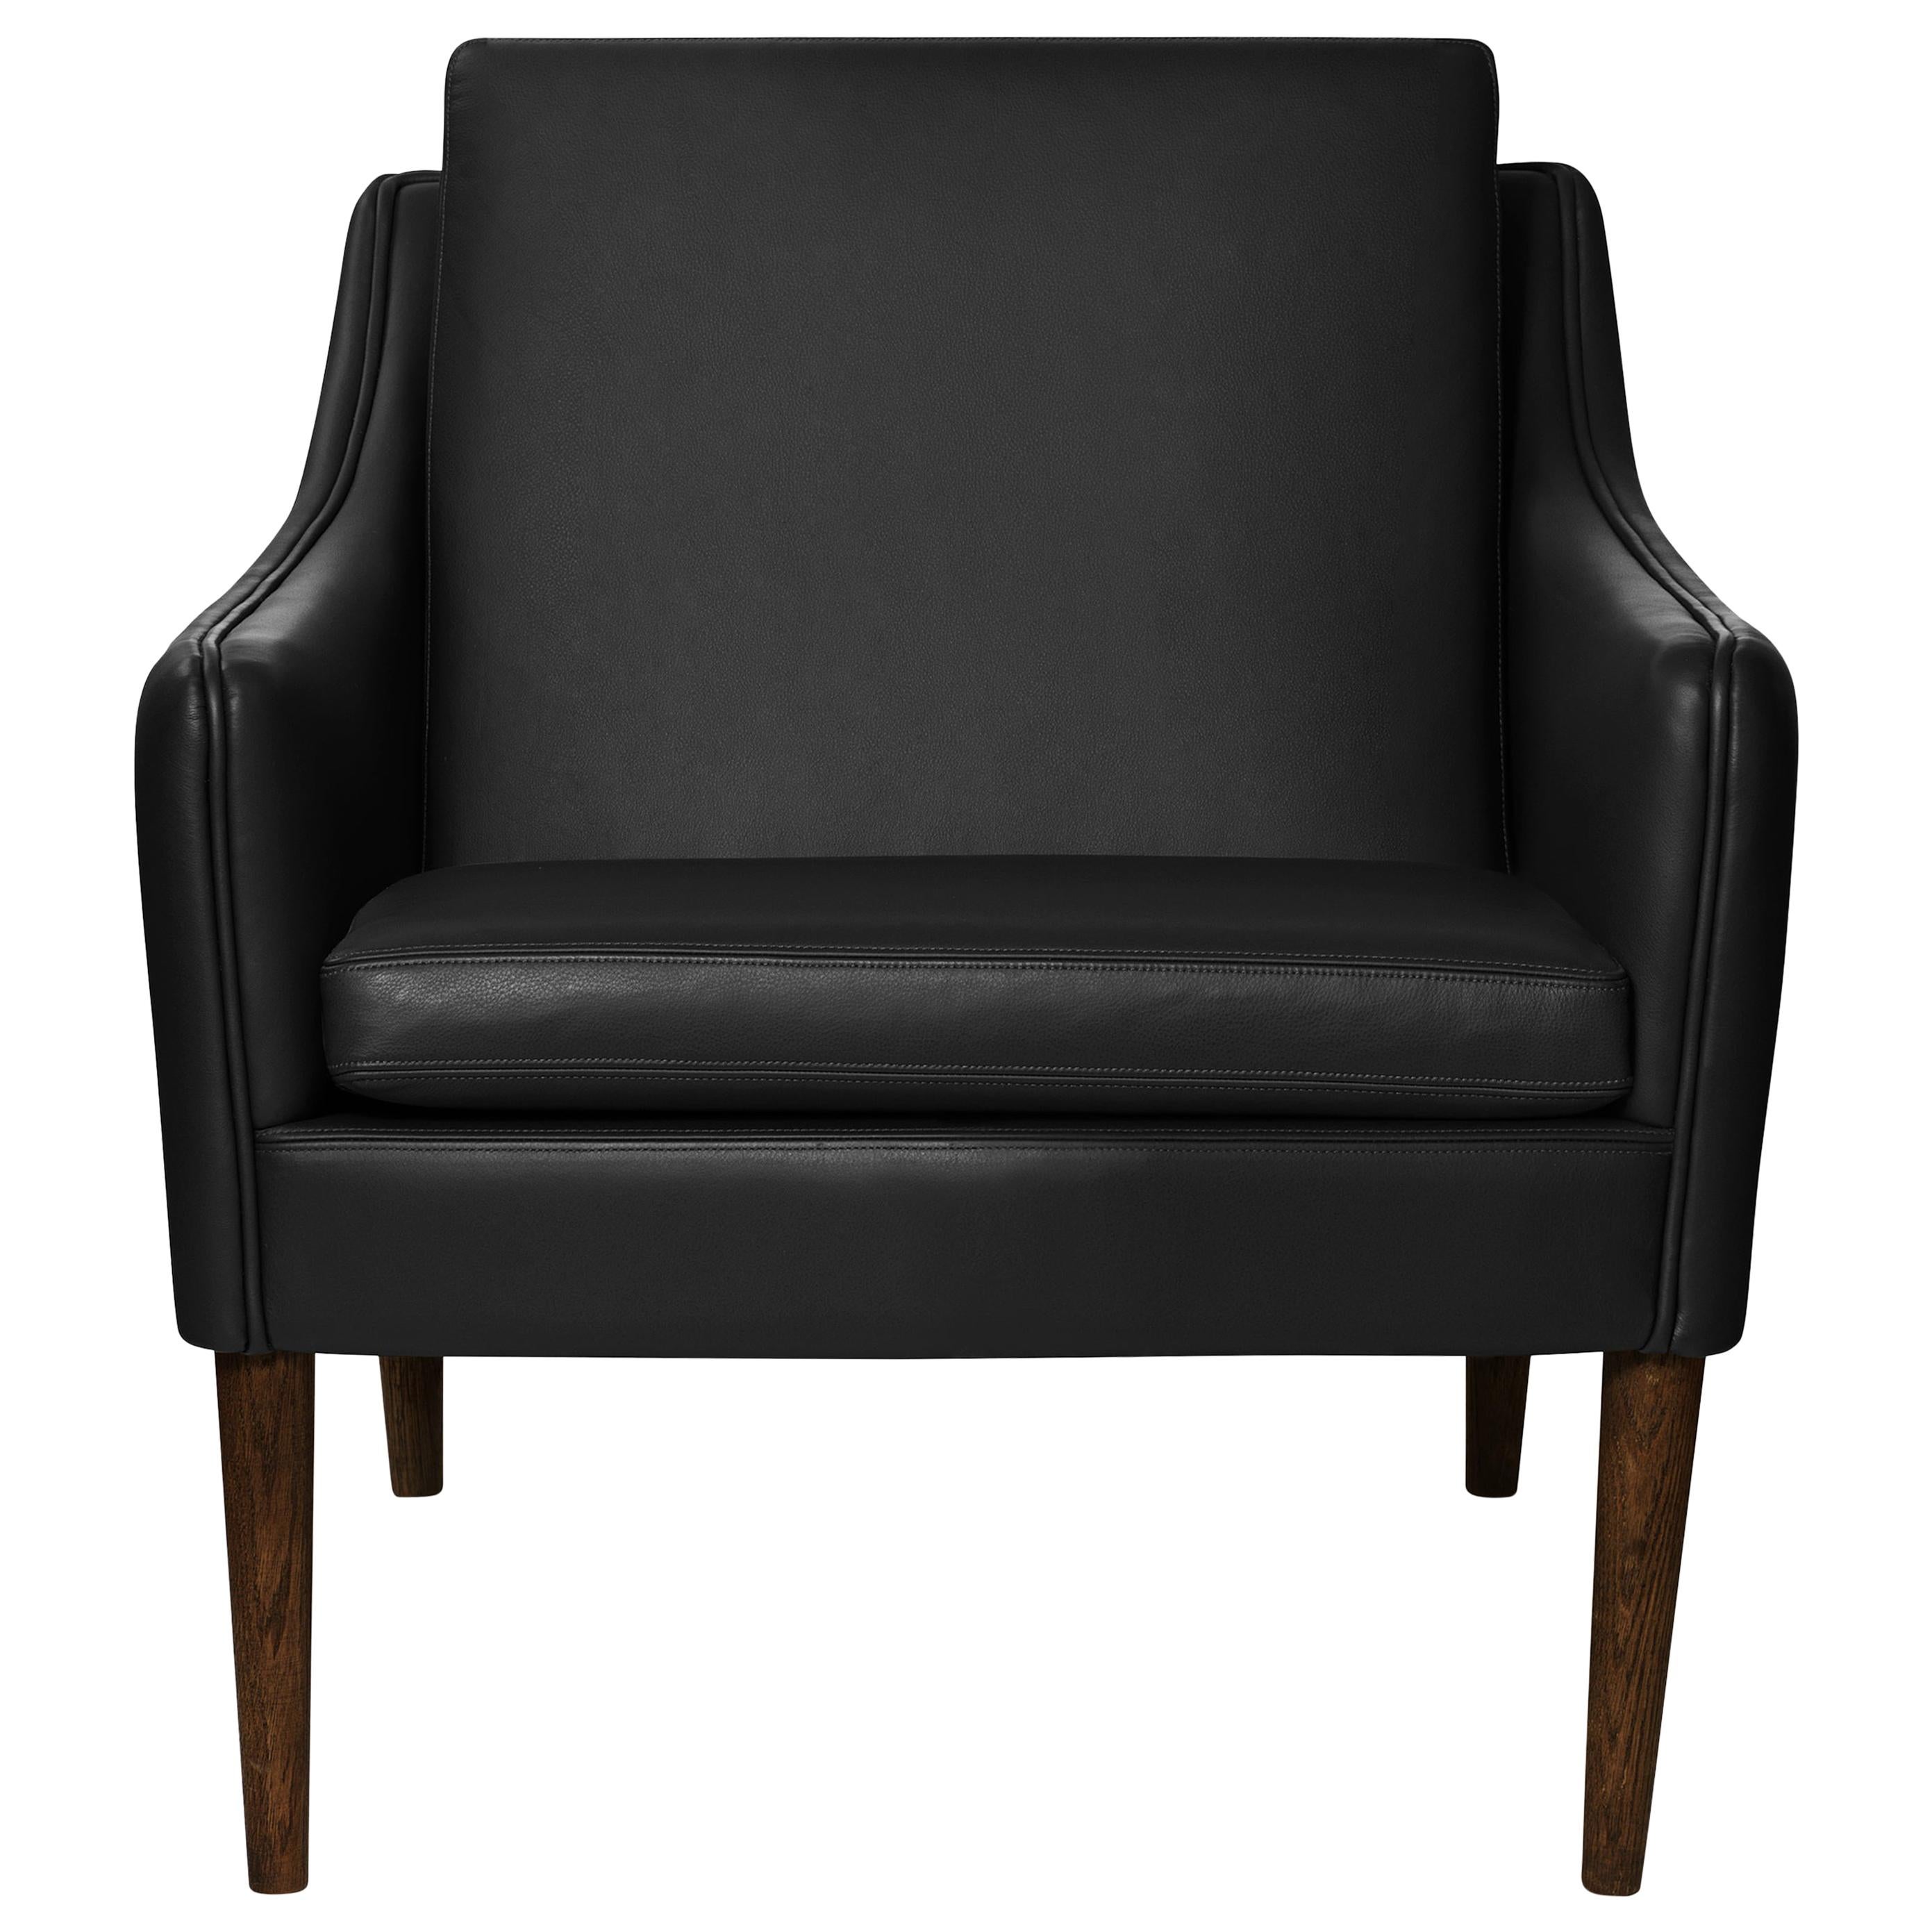 For Sale: Black (Challenger Black) Mr. Olsen Lounge Chair with Walnut Legs, by Hans Olsen from Warm Nordic